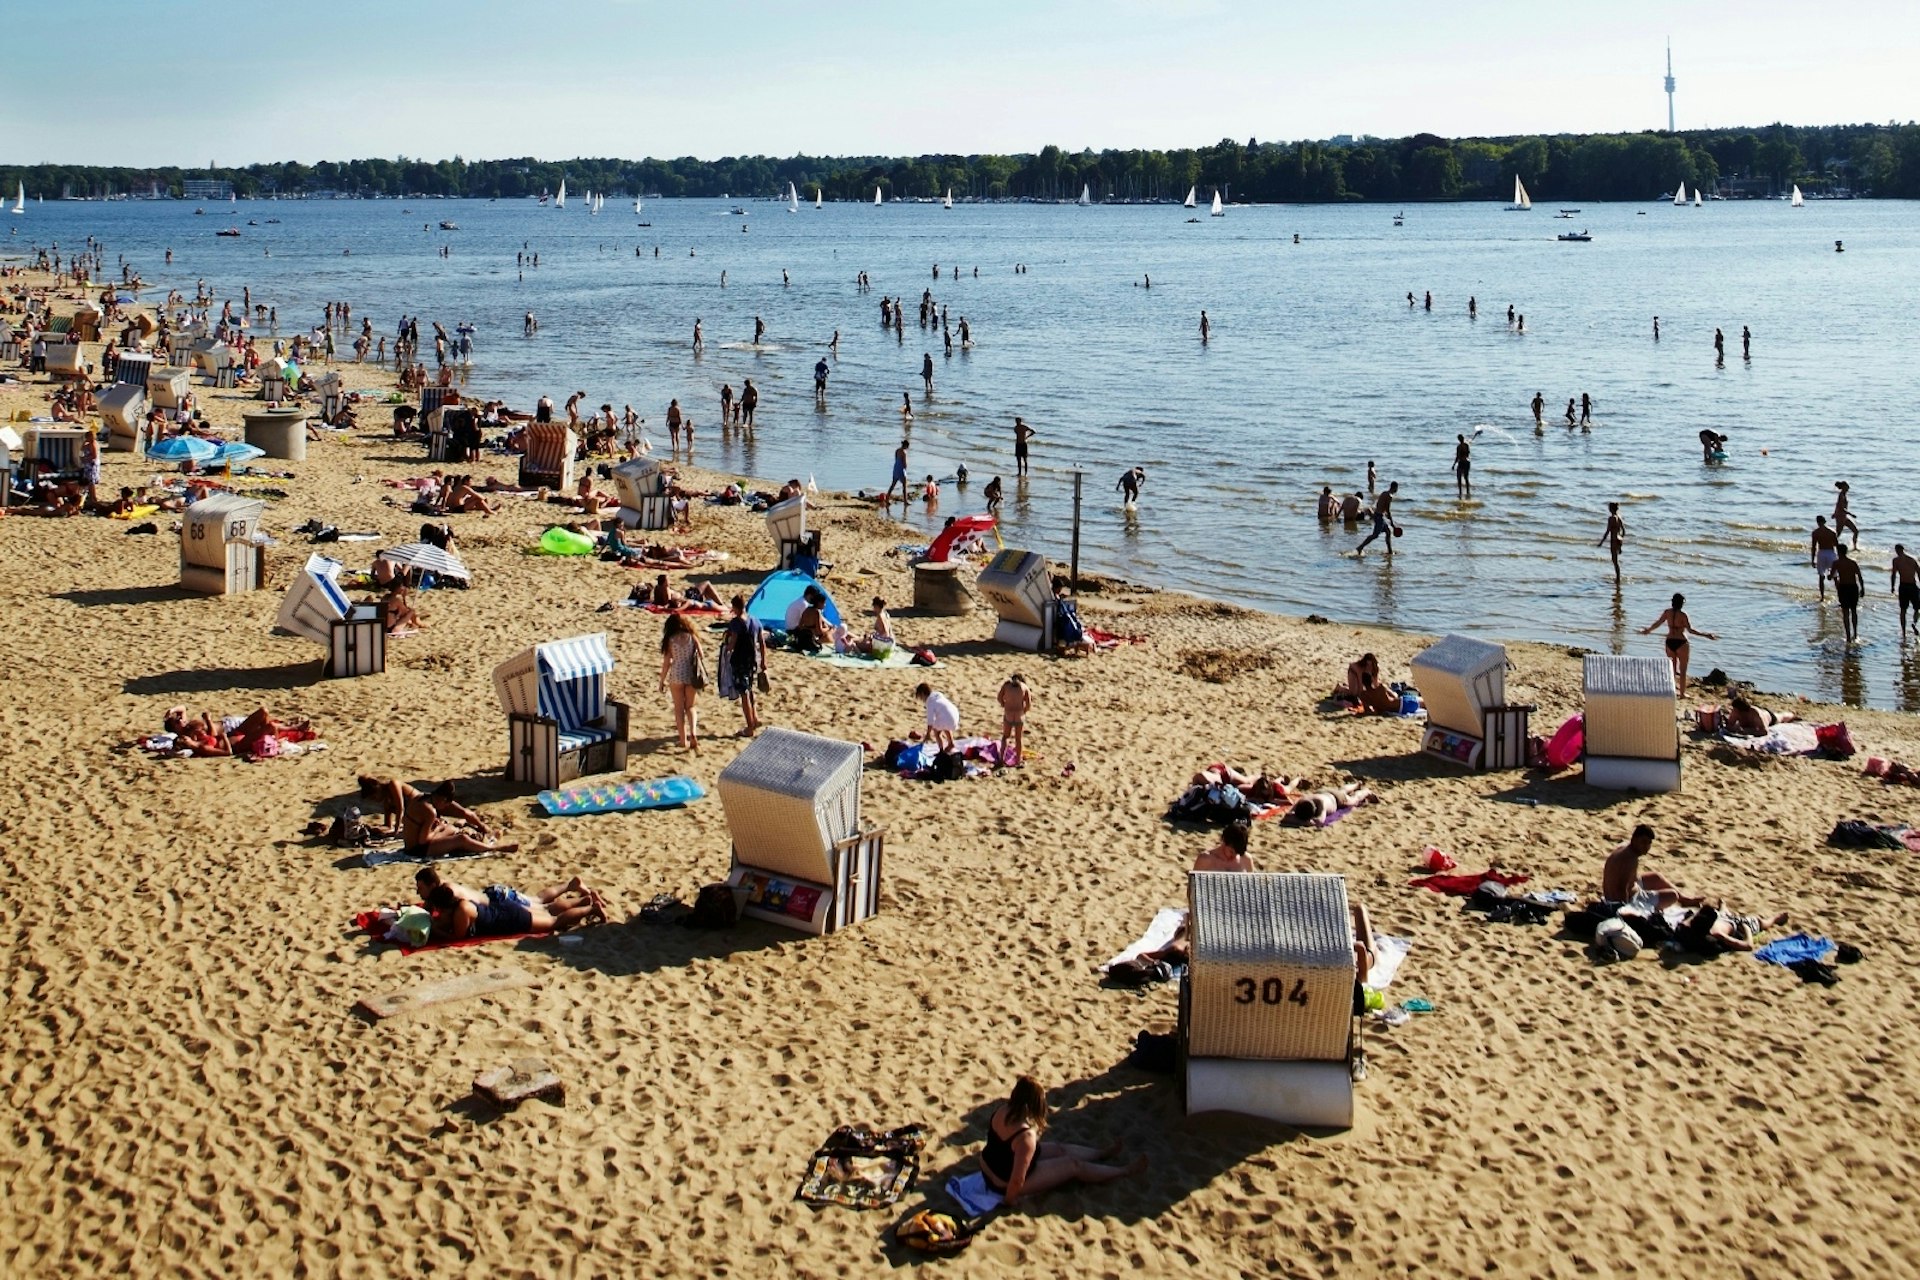 People on a sandy beach on the bank of Wannsee Lake in Berlin